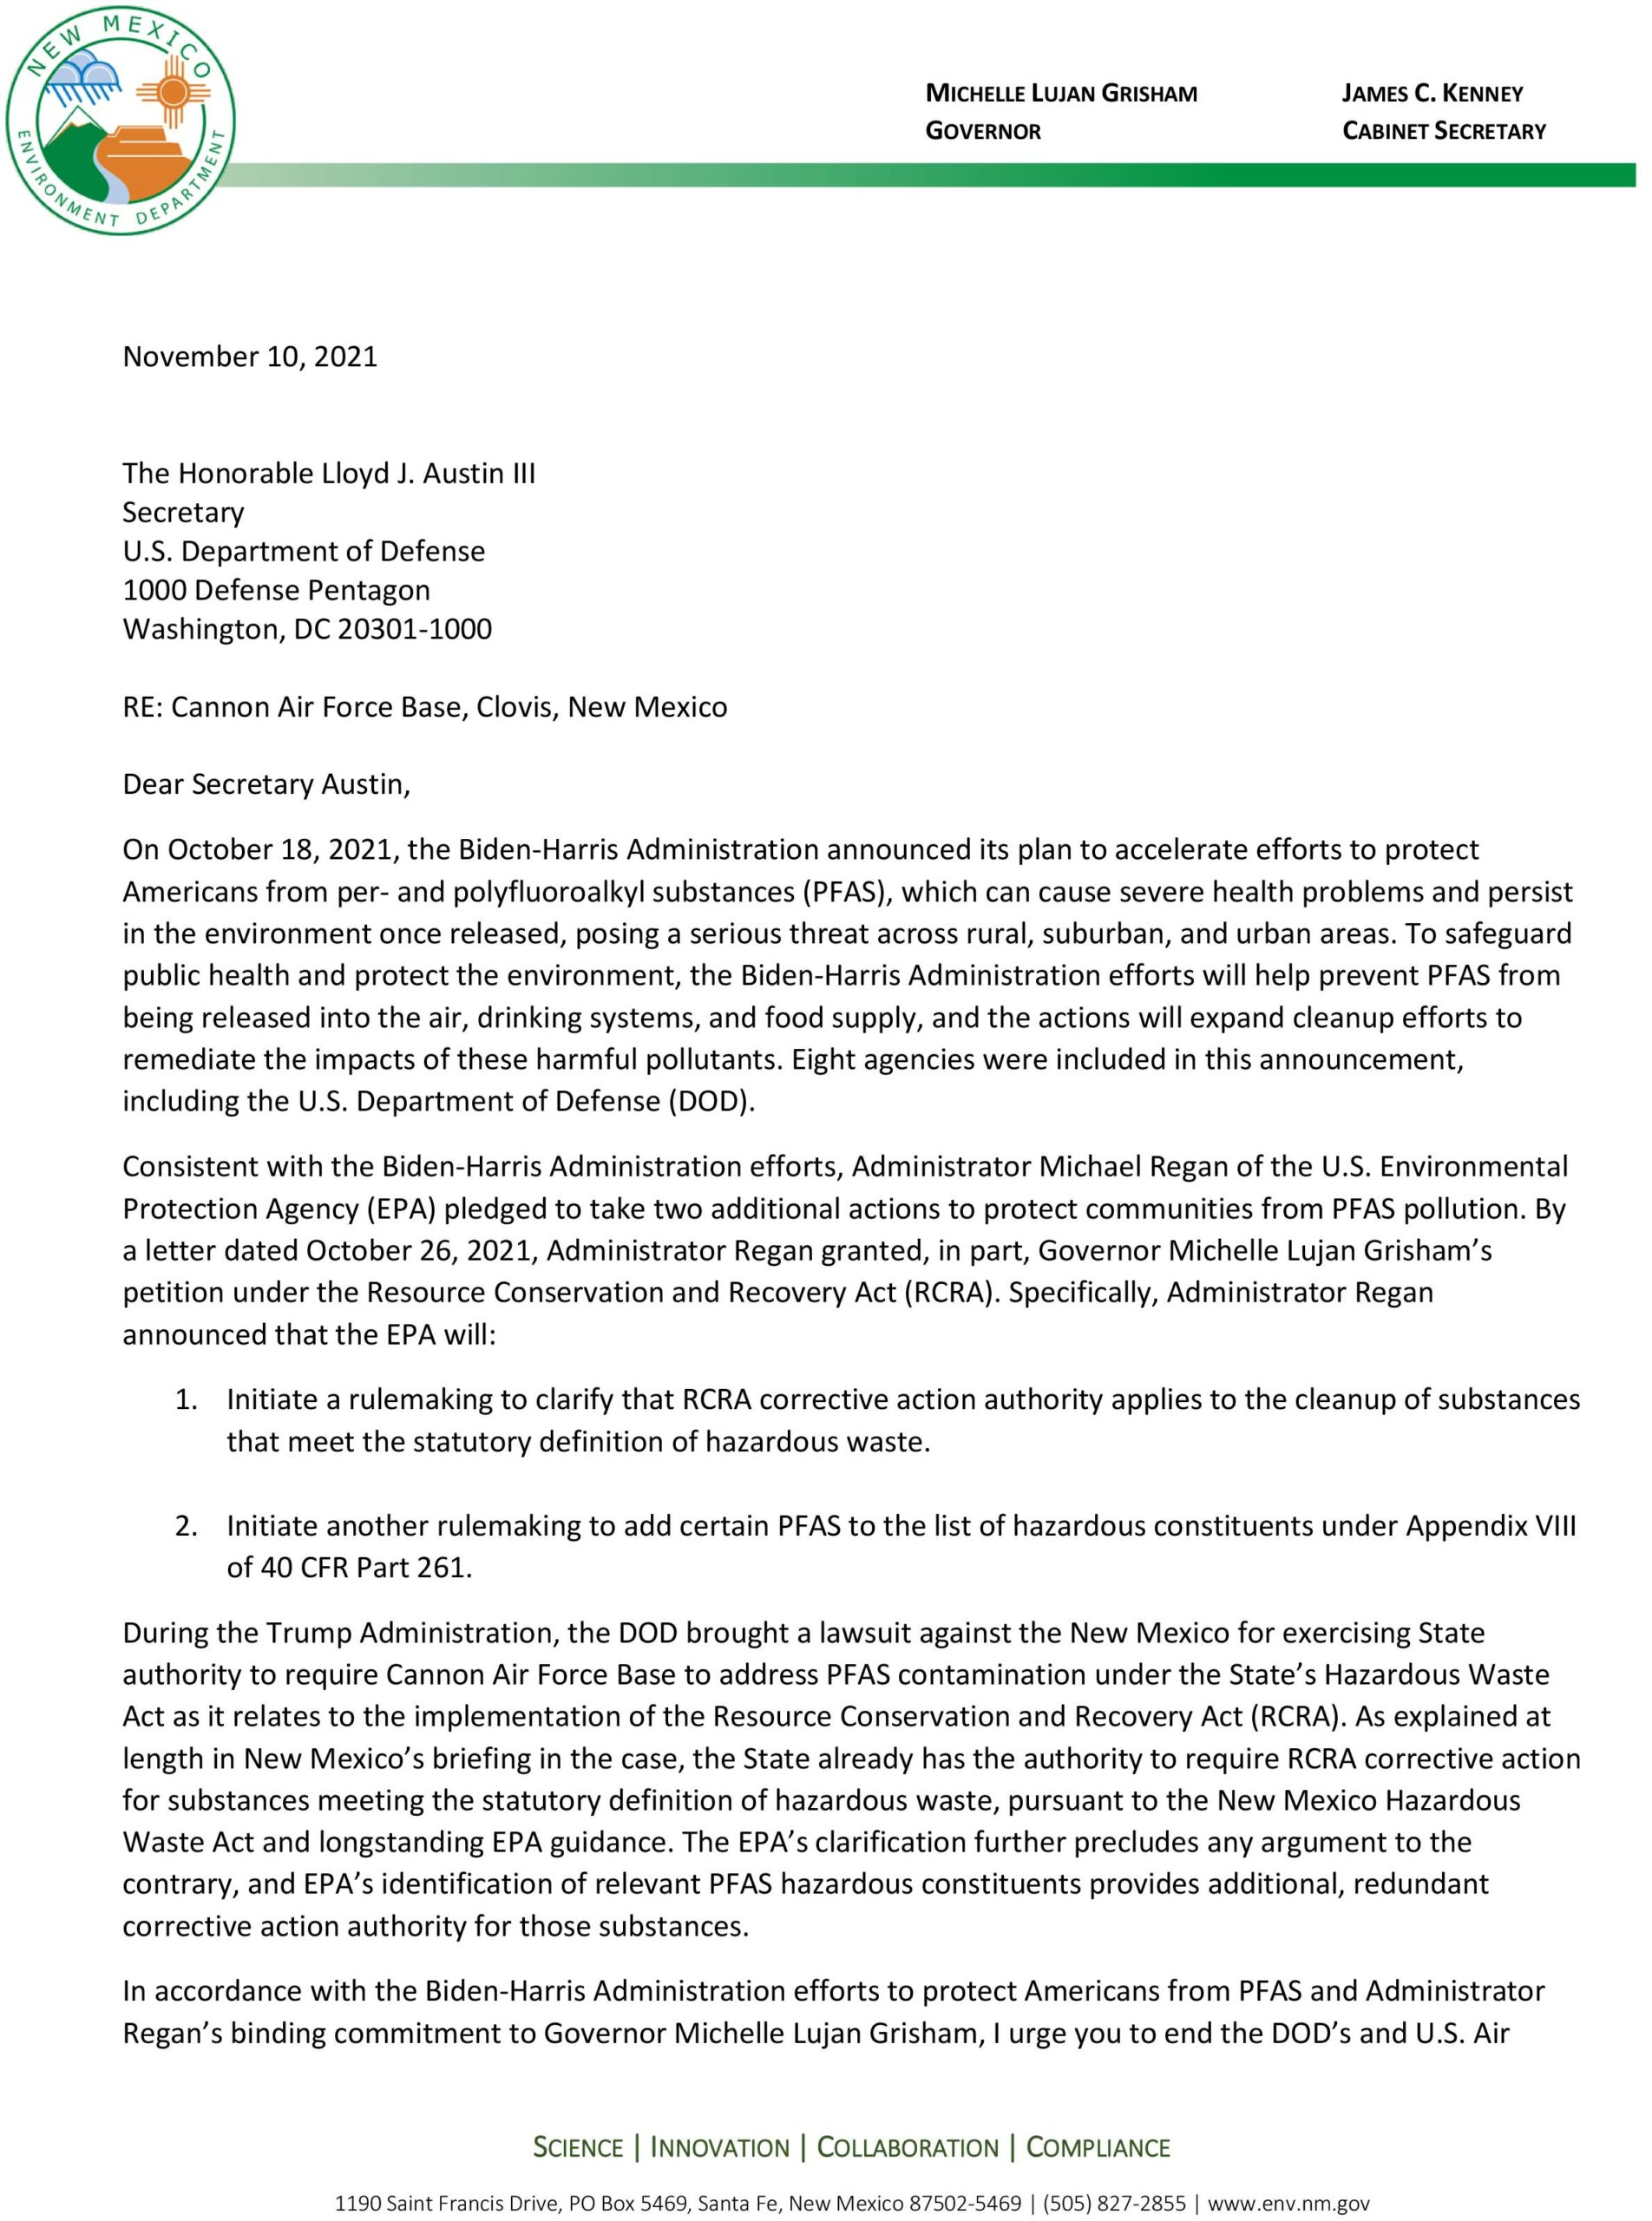 NMED Letter to DOD about PFAS